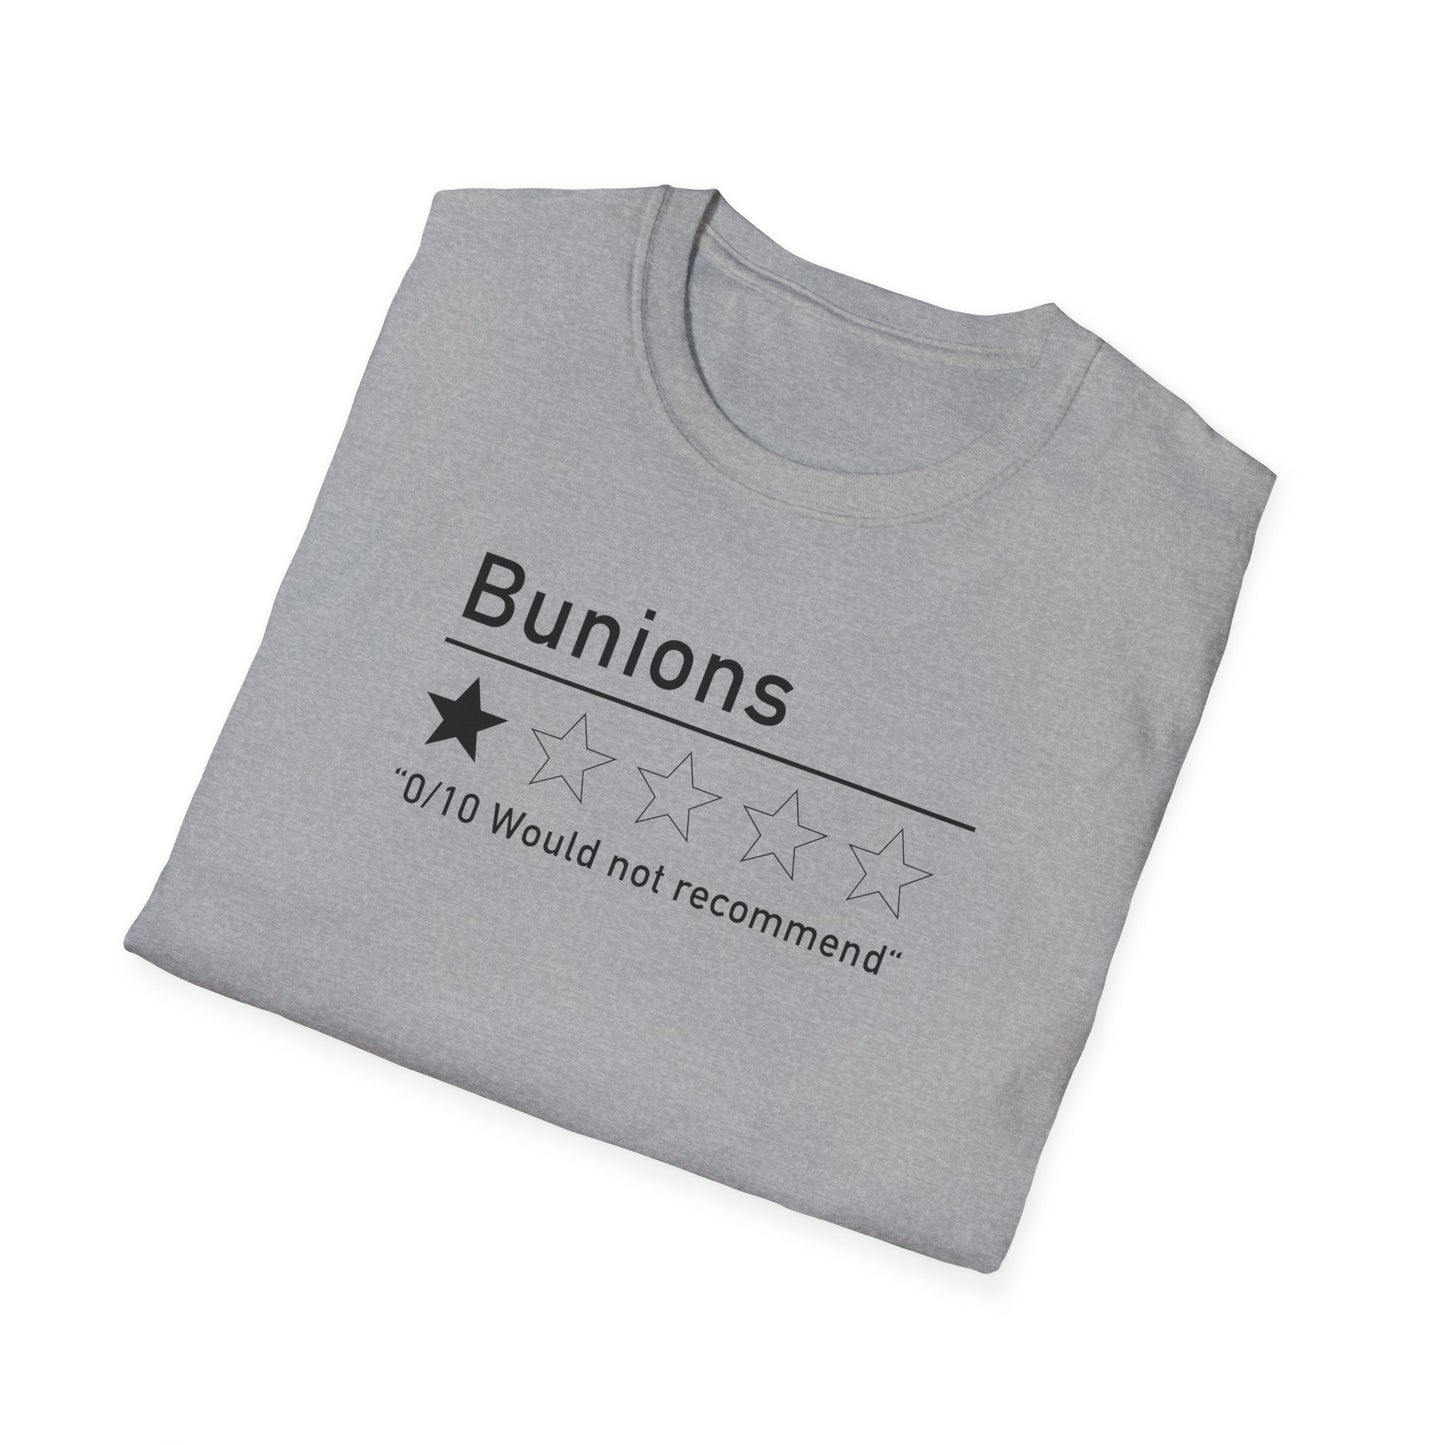 Bunions - "Would Not Recommend"